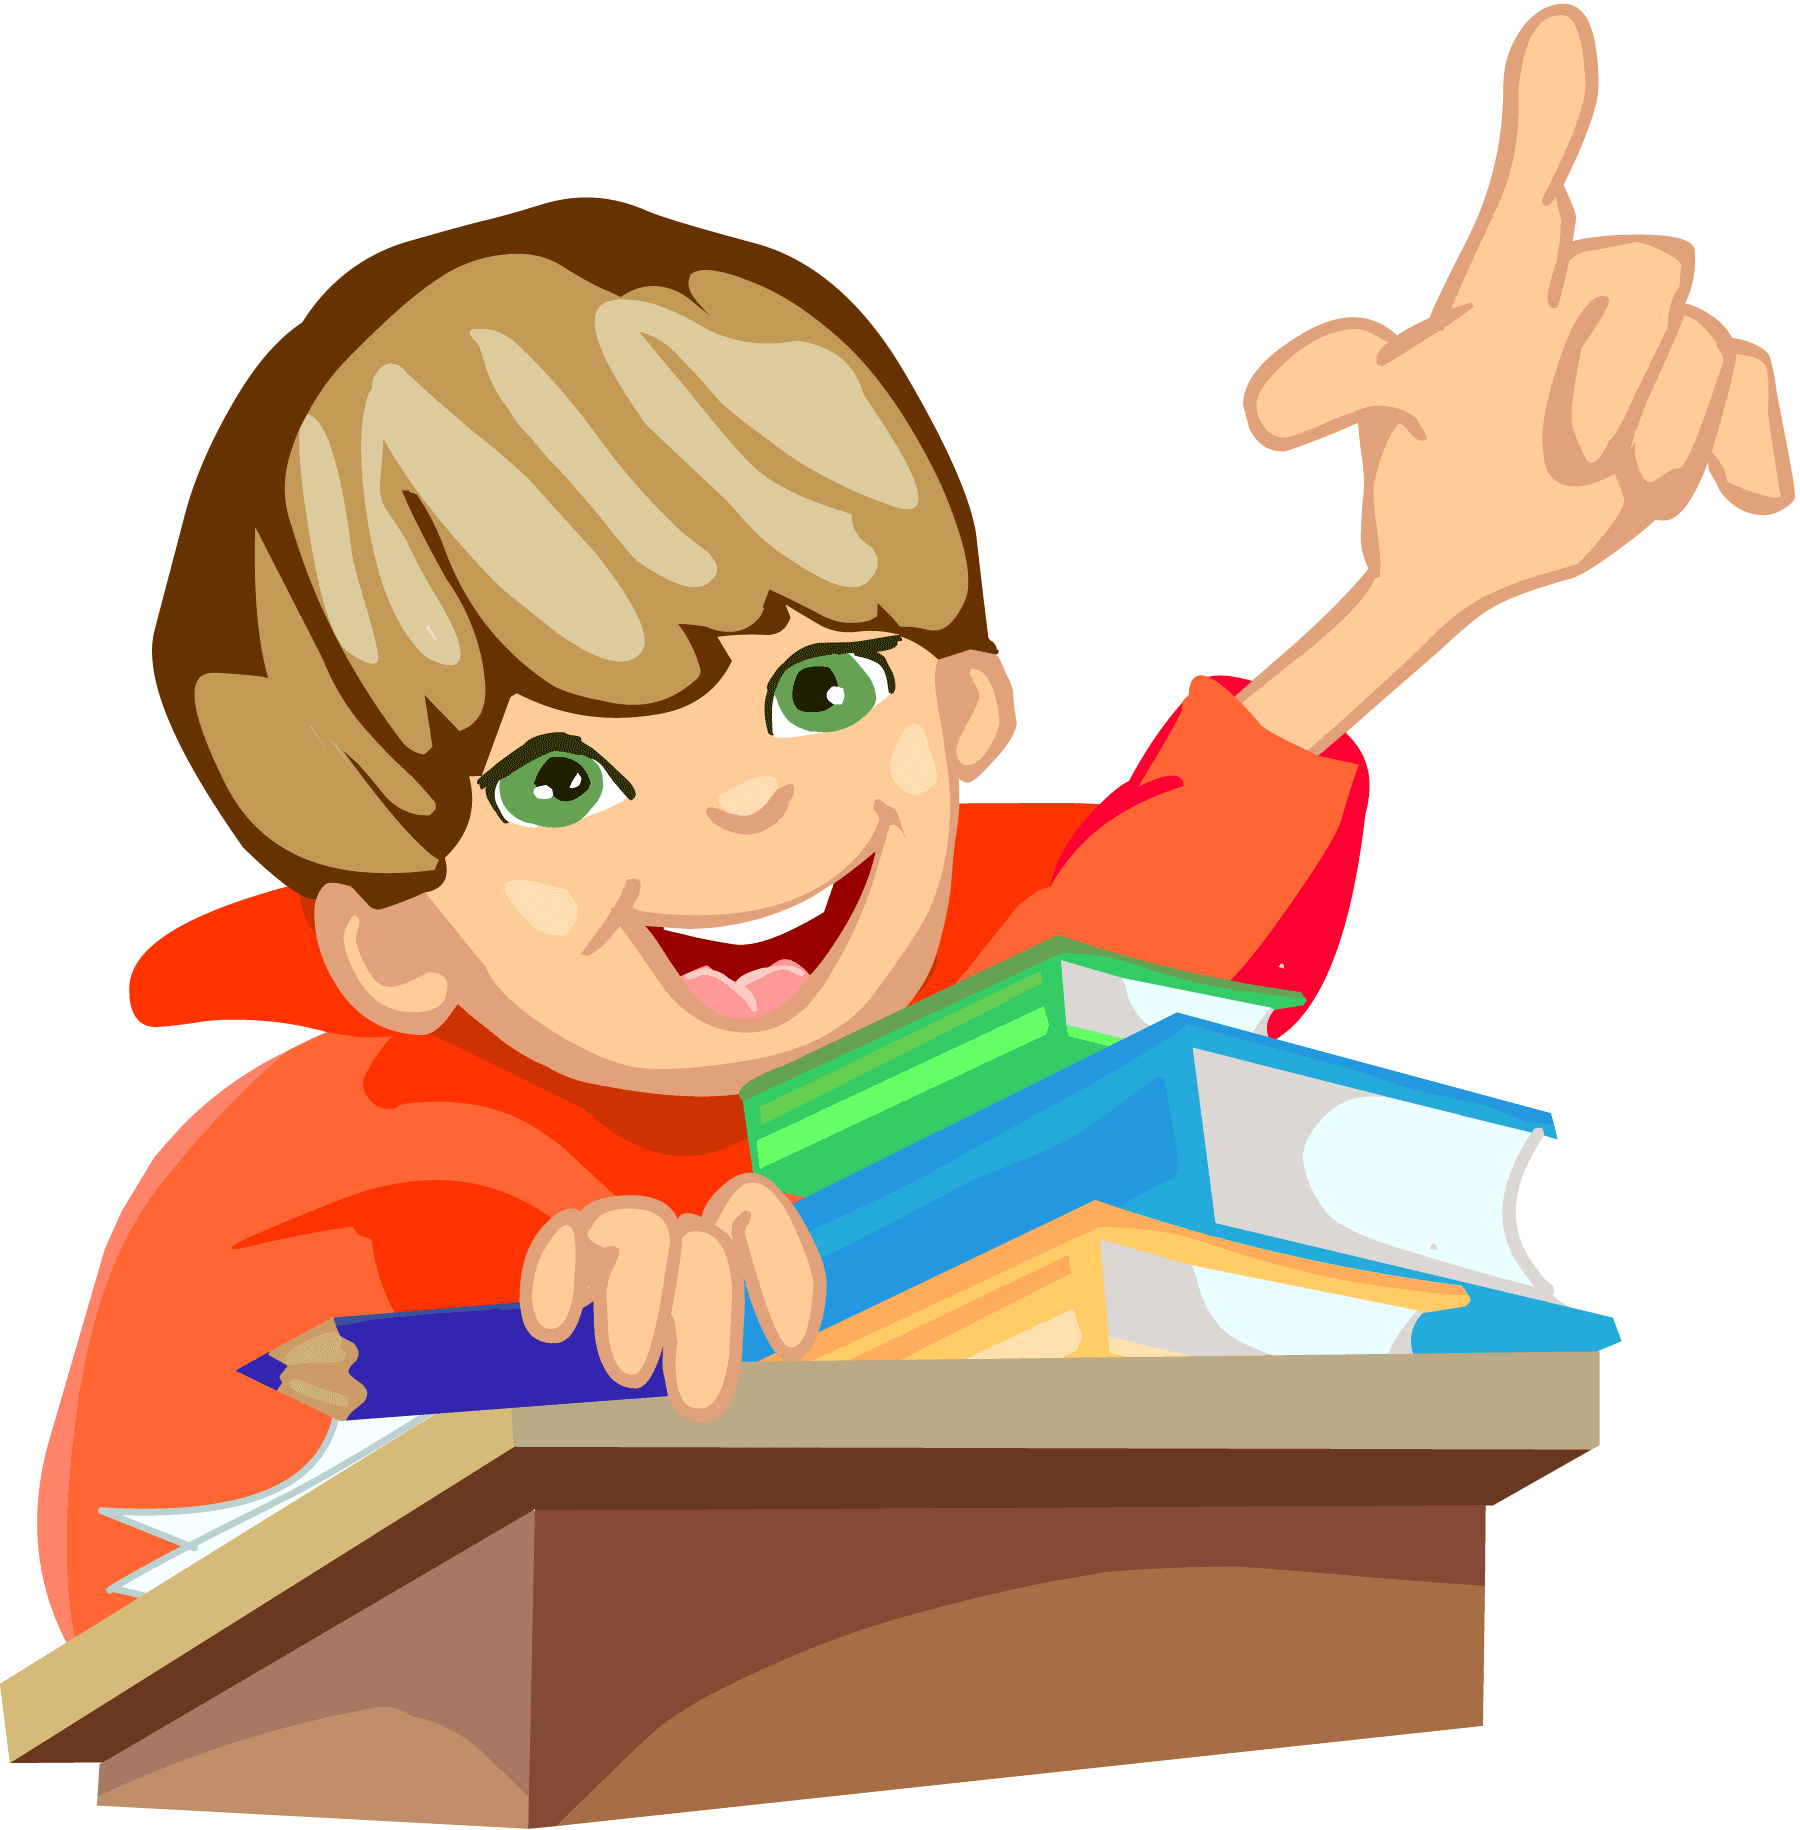 Student Studying Clipart - ClipArt Best - ClipArt Best